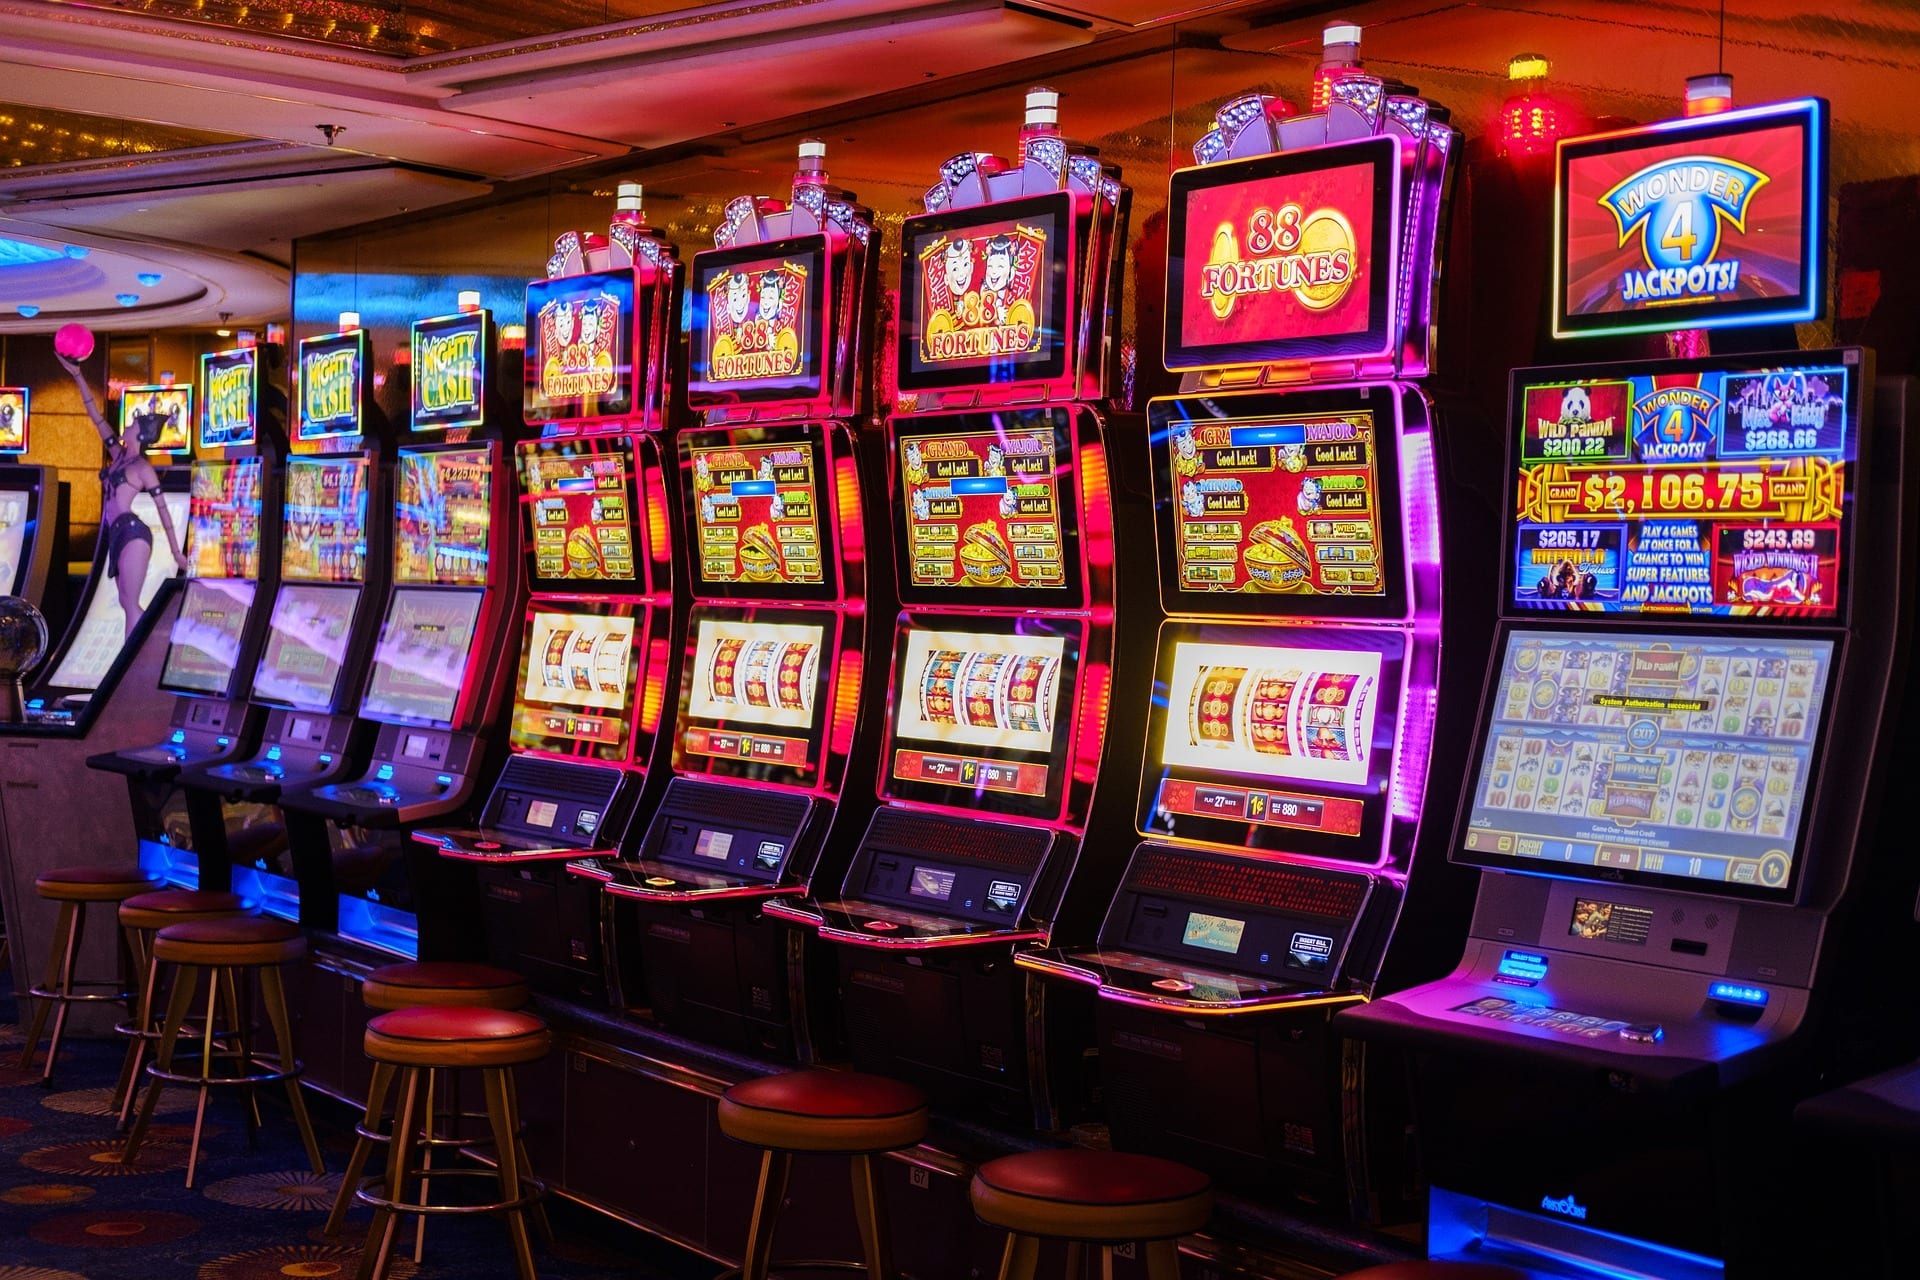 What The Best Slot Machine To Play At A Casino